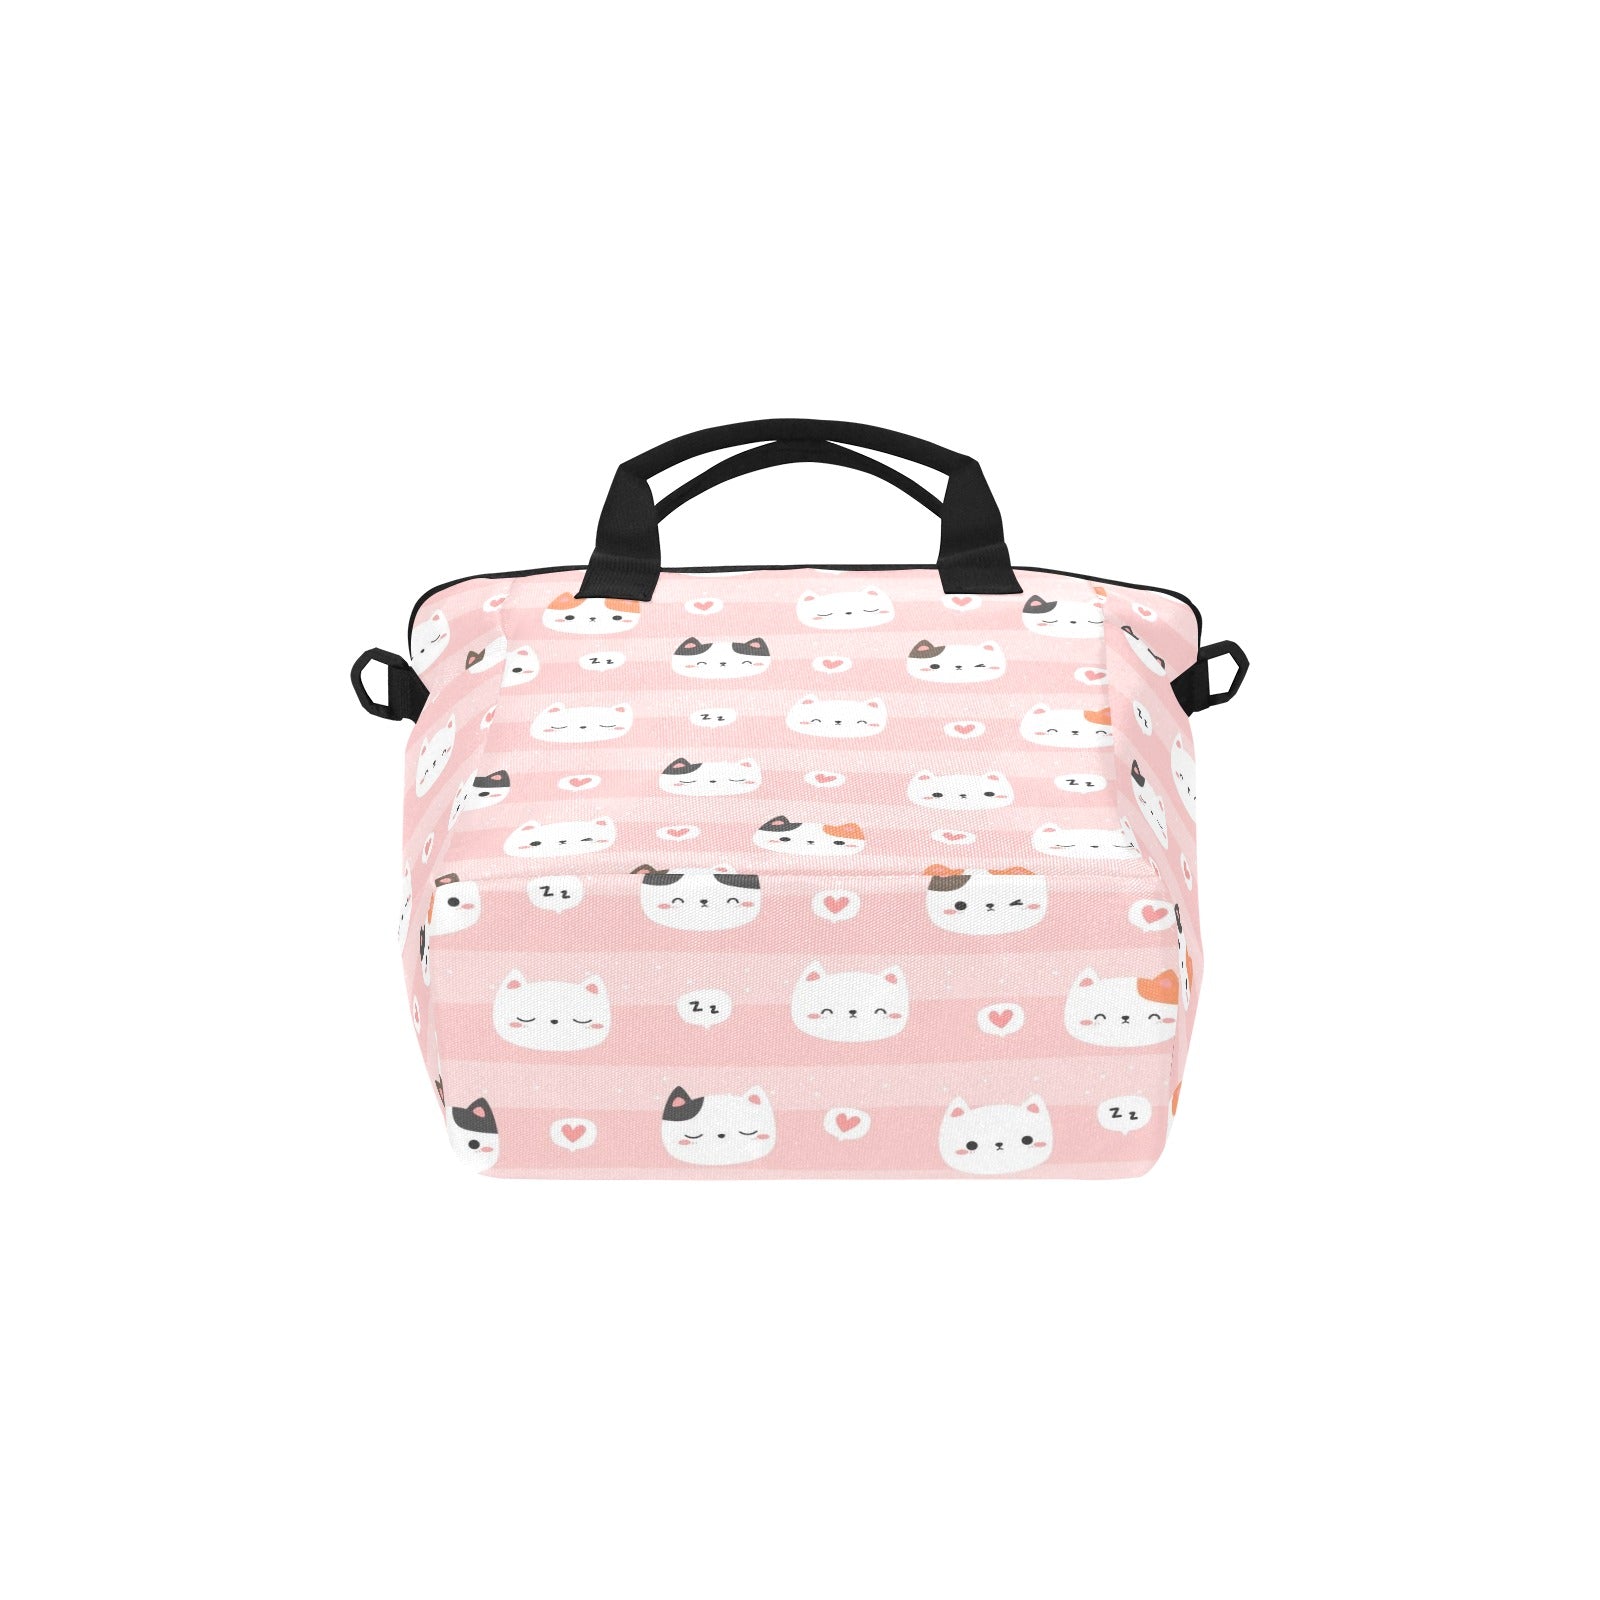 Pink Cats - Tote Bag with Shoulder Strap Nylon Tote Bag